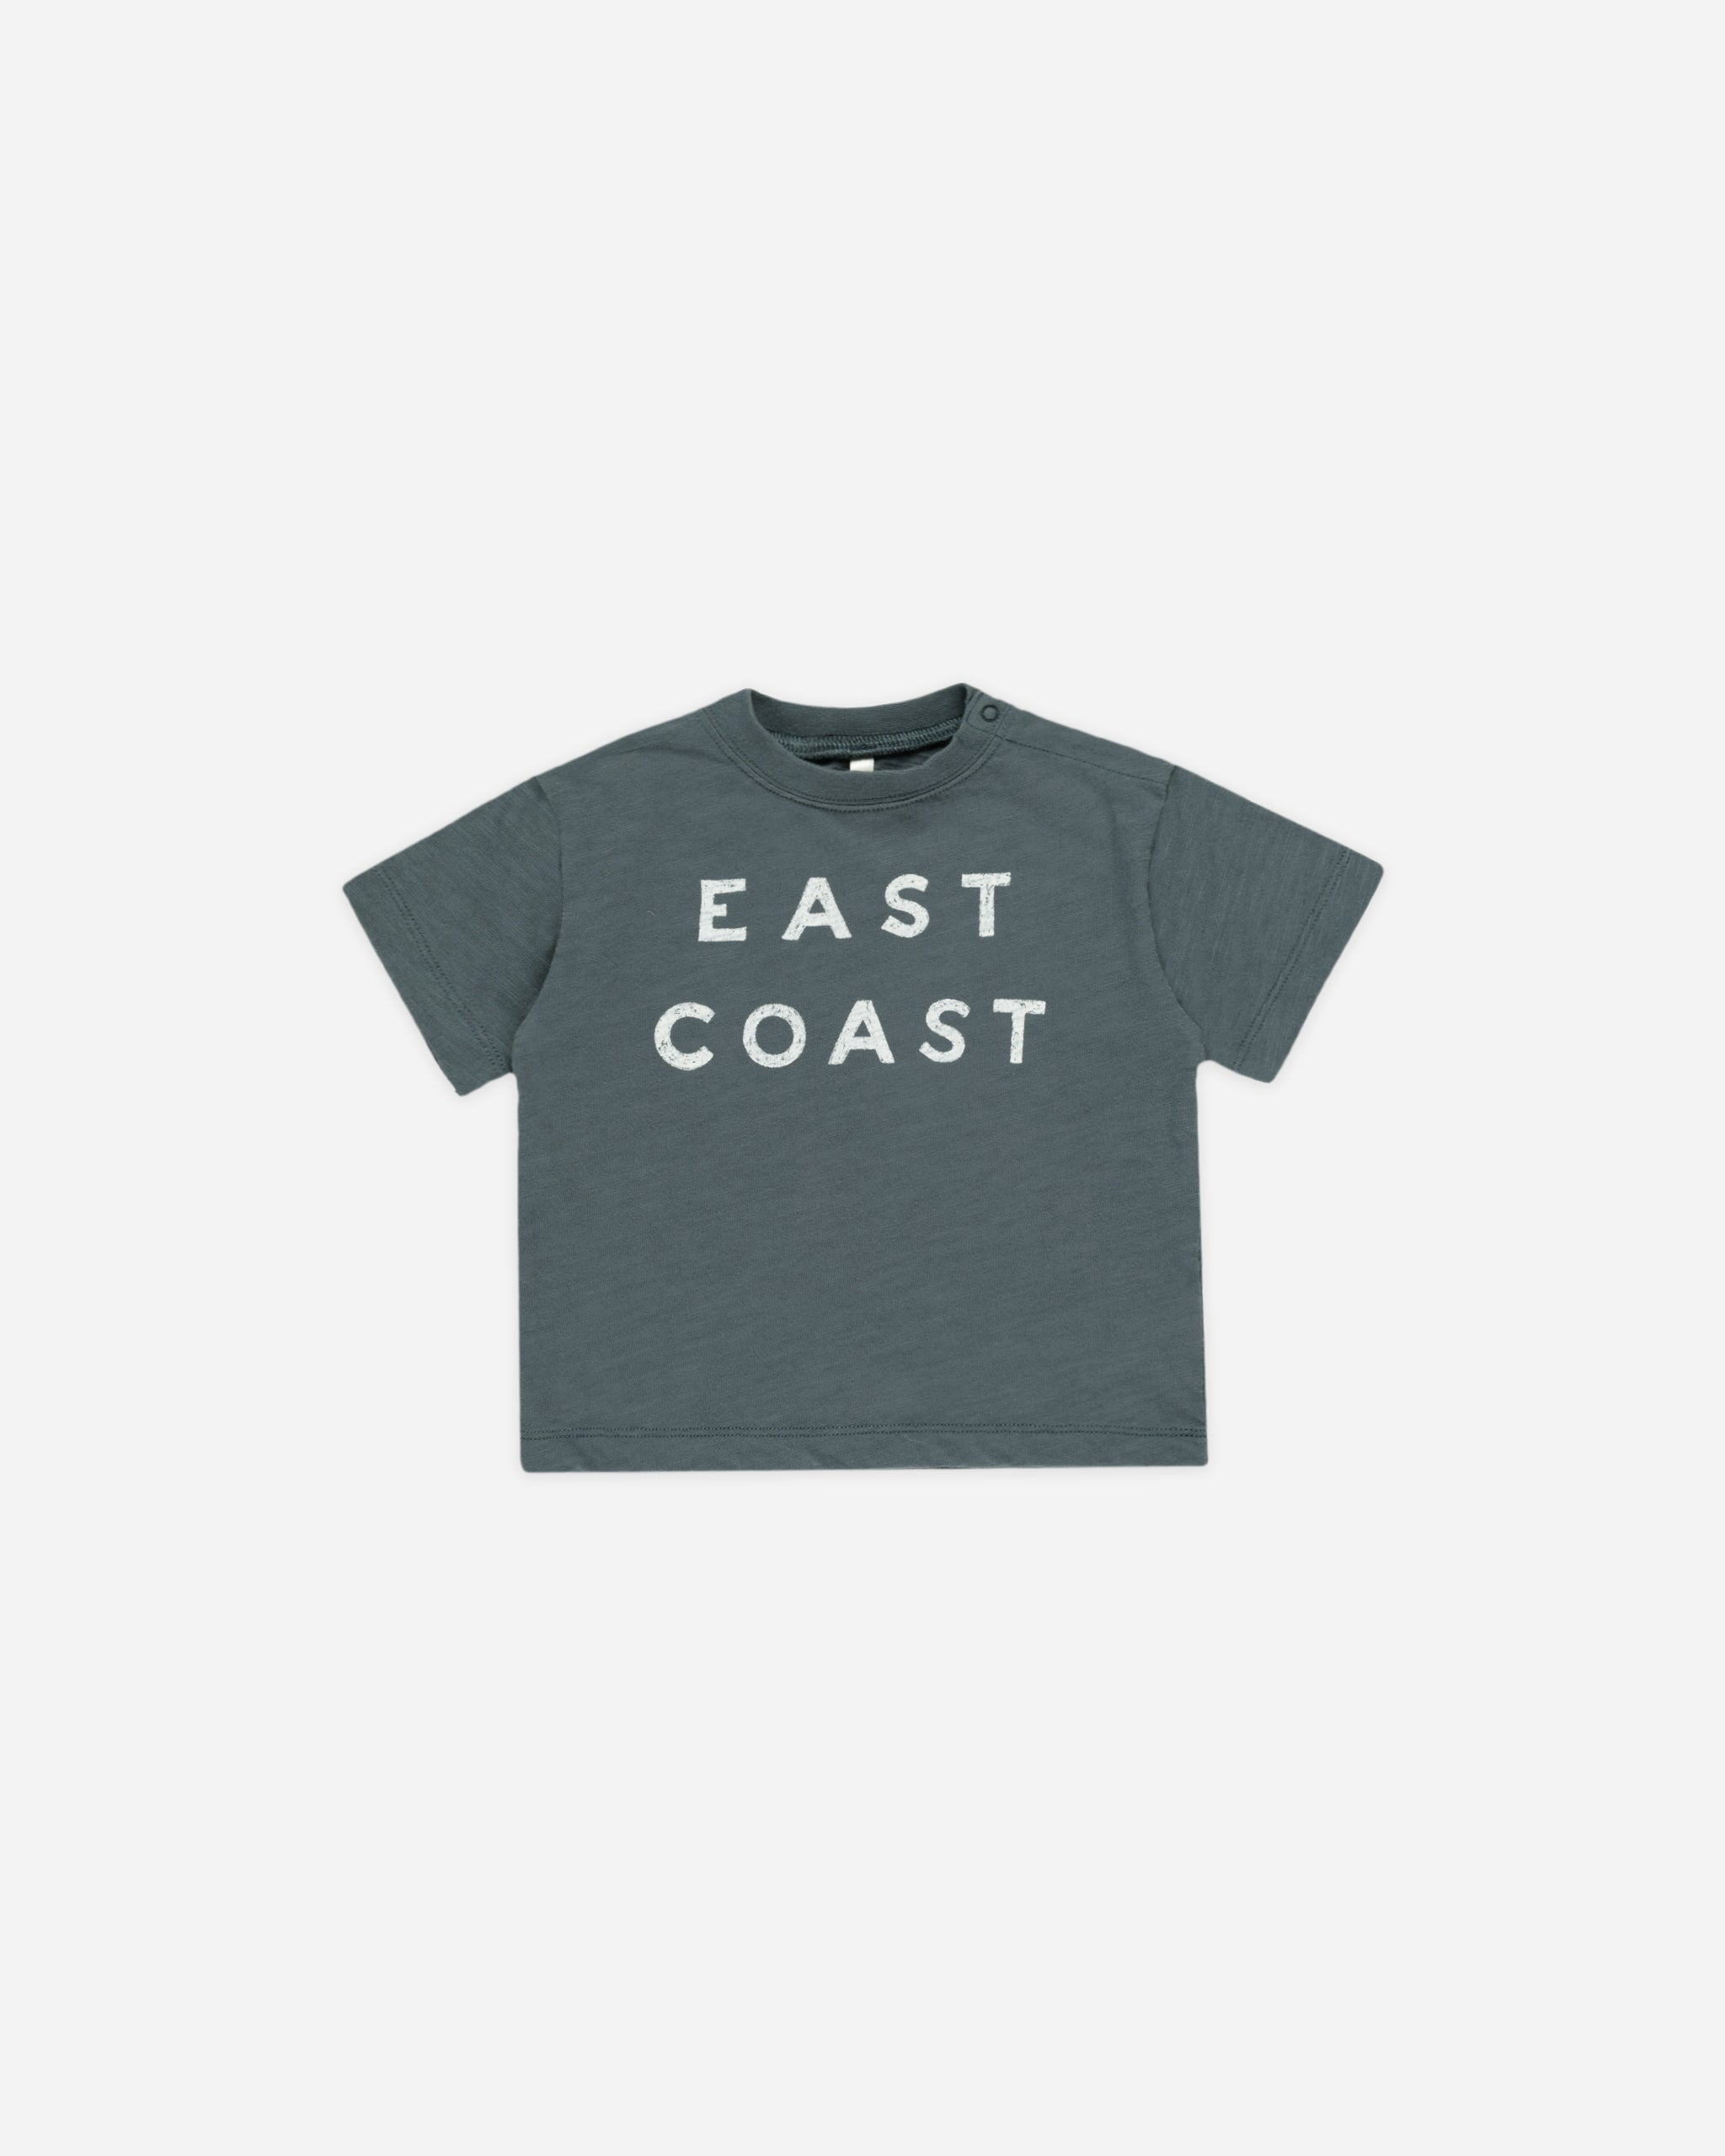 Relaxed Tee || East Coast - Rylee + Cru | Kids Clothes | Trendy Baby Clothes | Modern Infant Outfits |